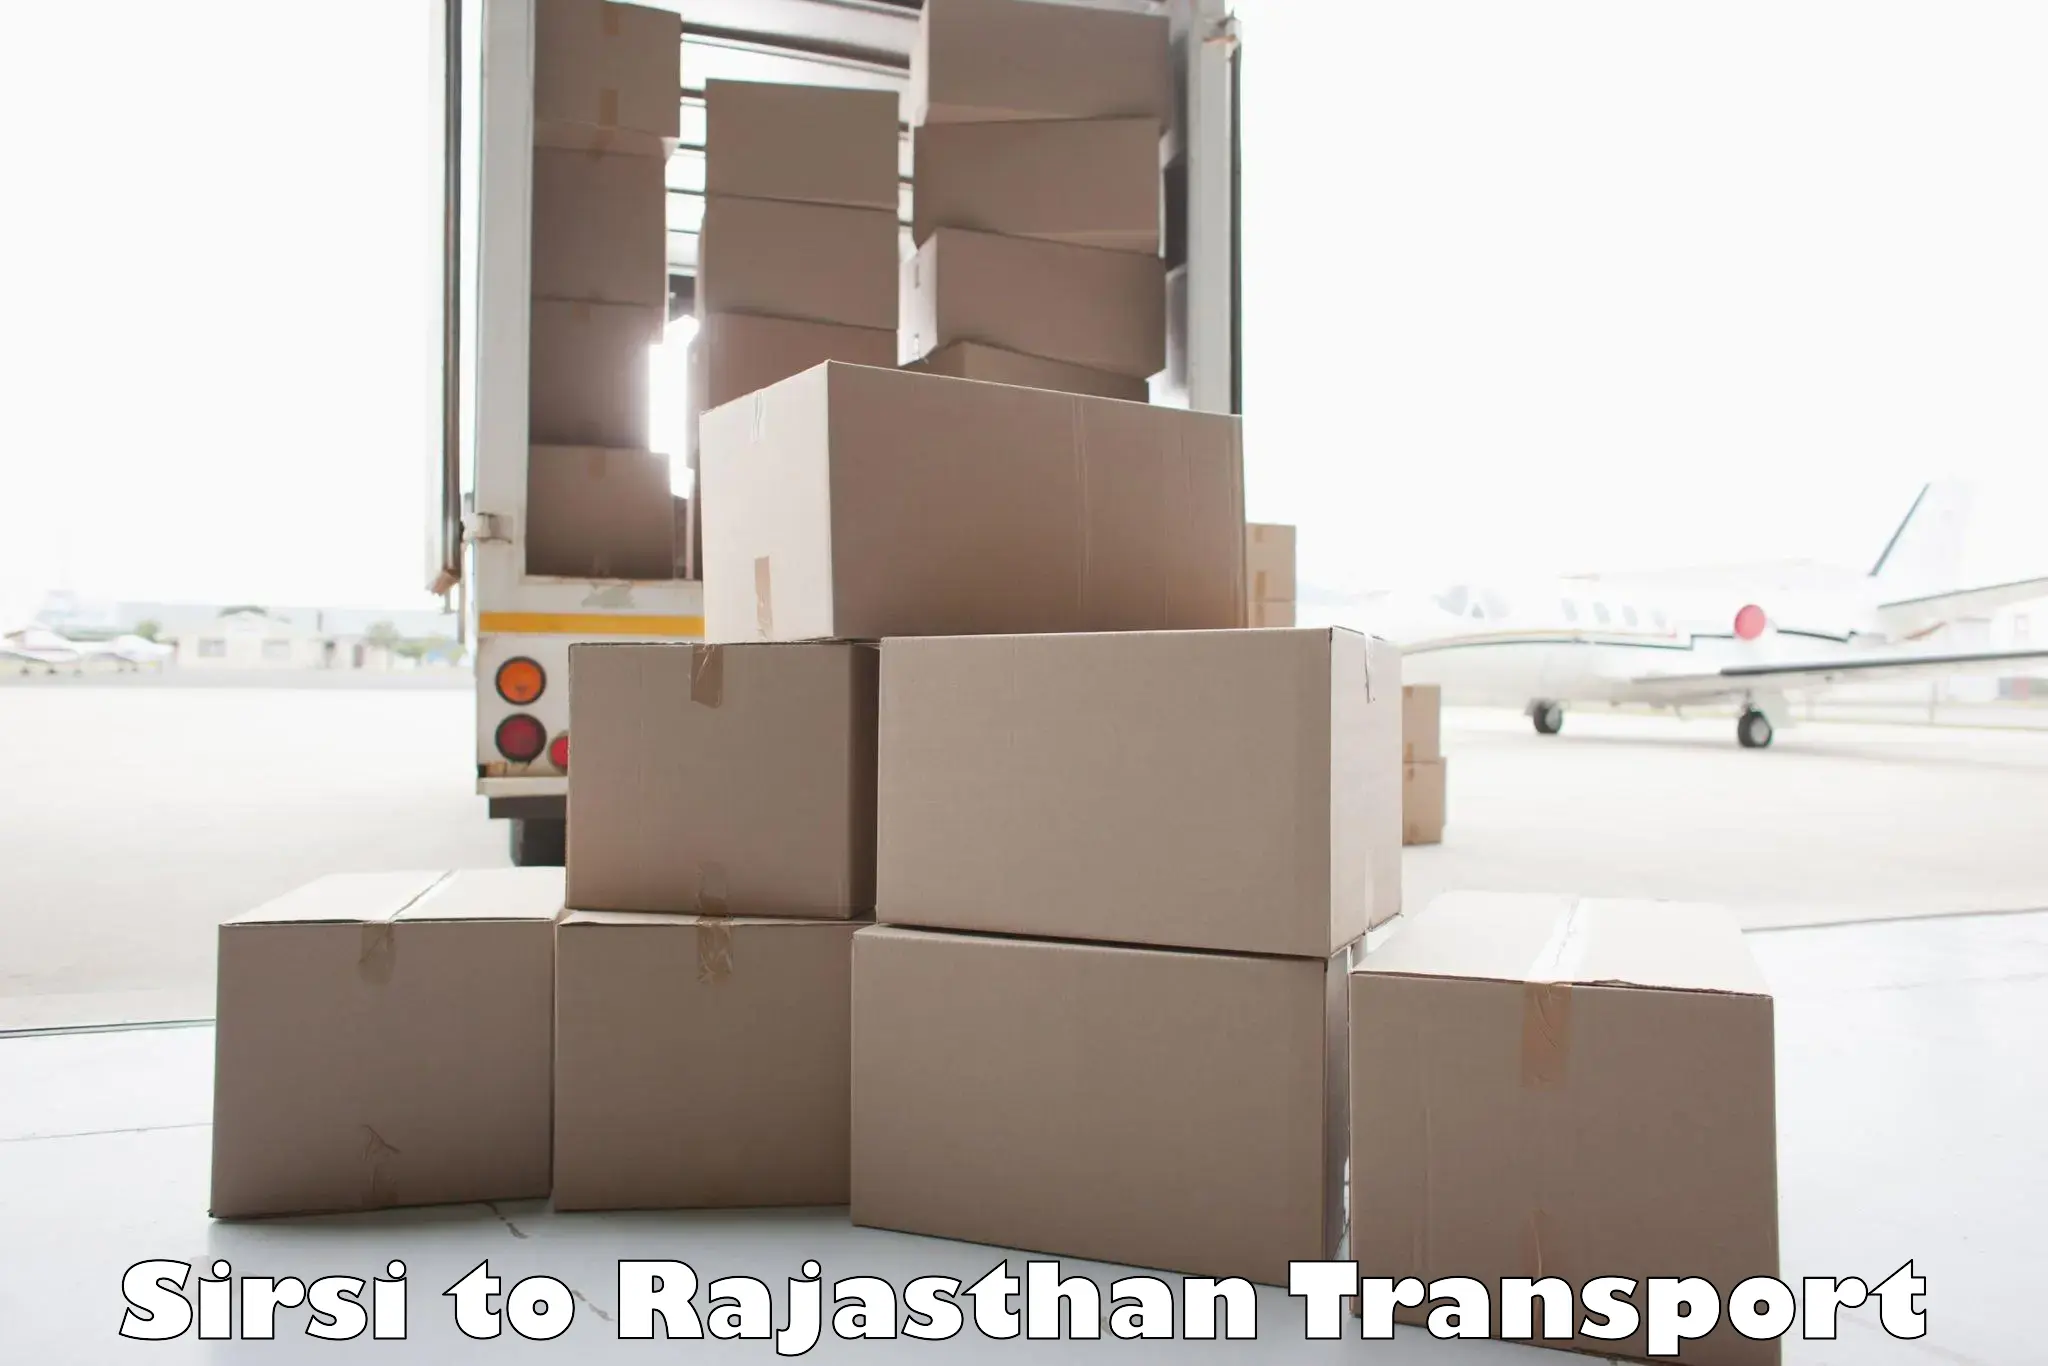 Container transport service Sirsi to Rajasthan